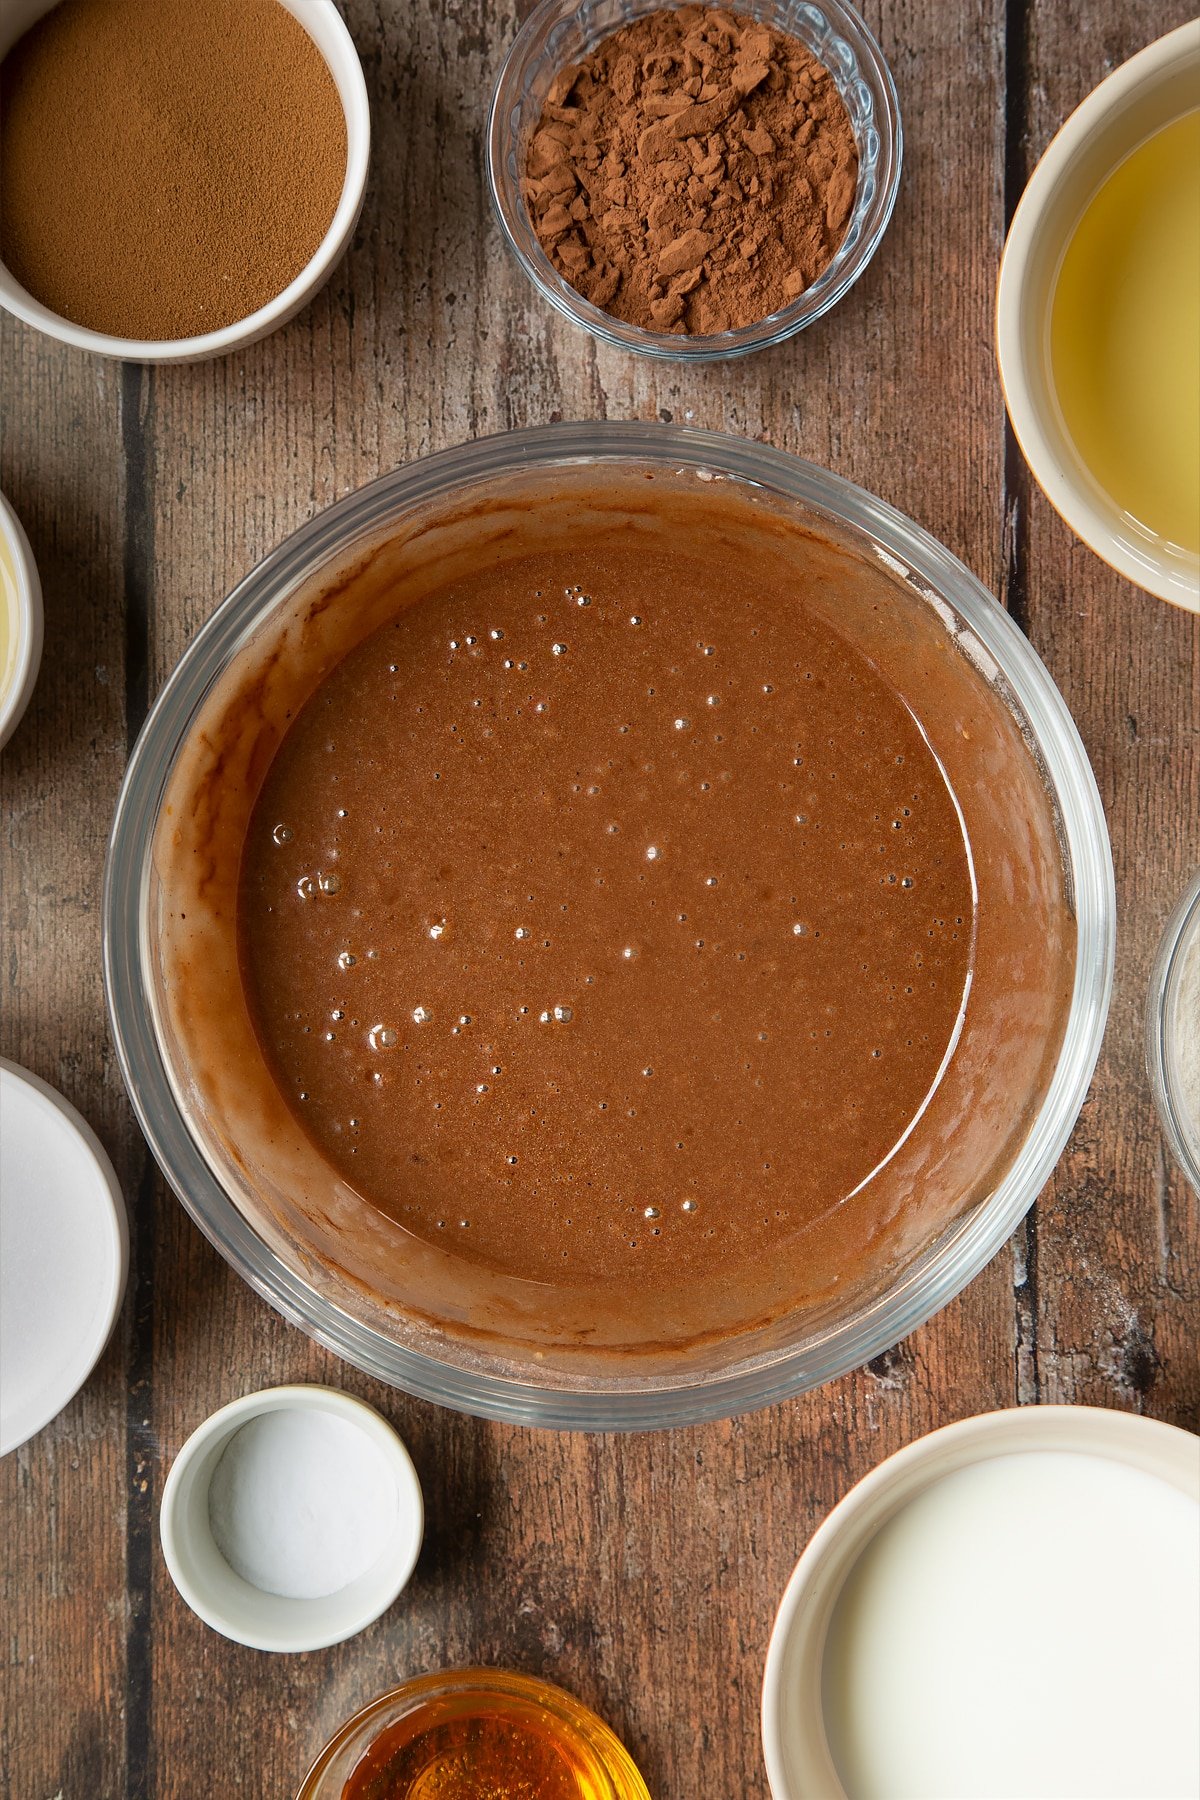 Cake mix in a glass mixing bowl. Surrounding the bowl is ingredients to make dalgona coffee cake.